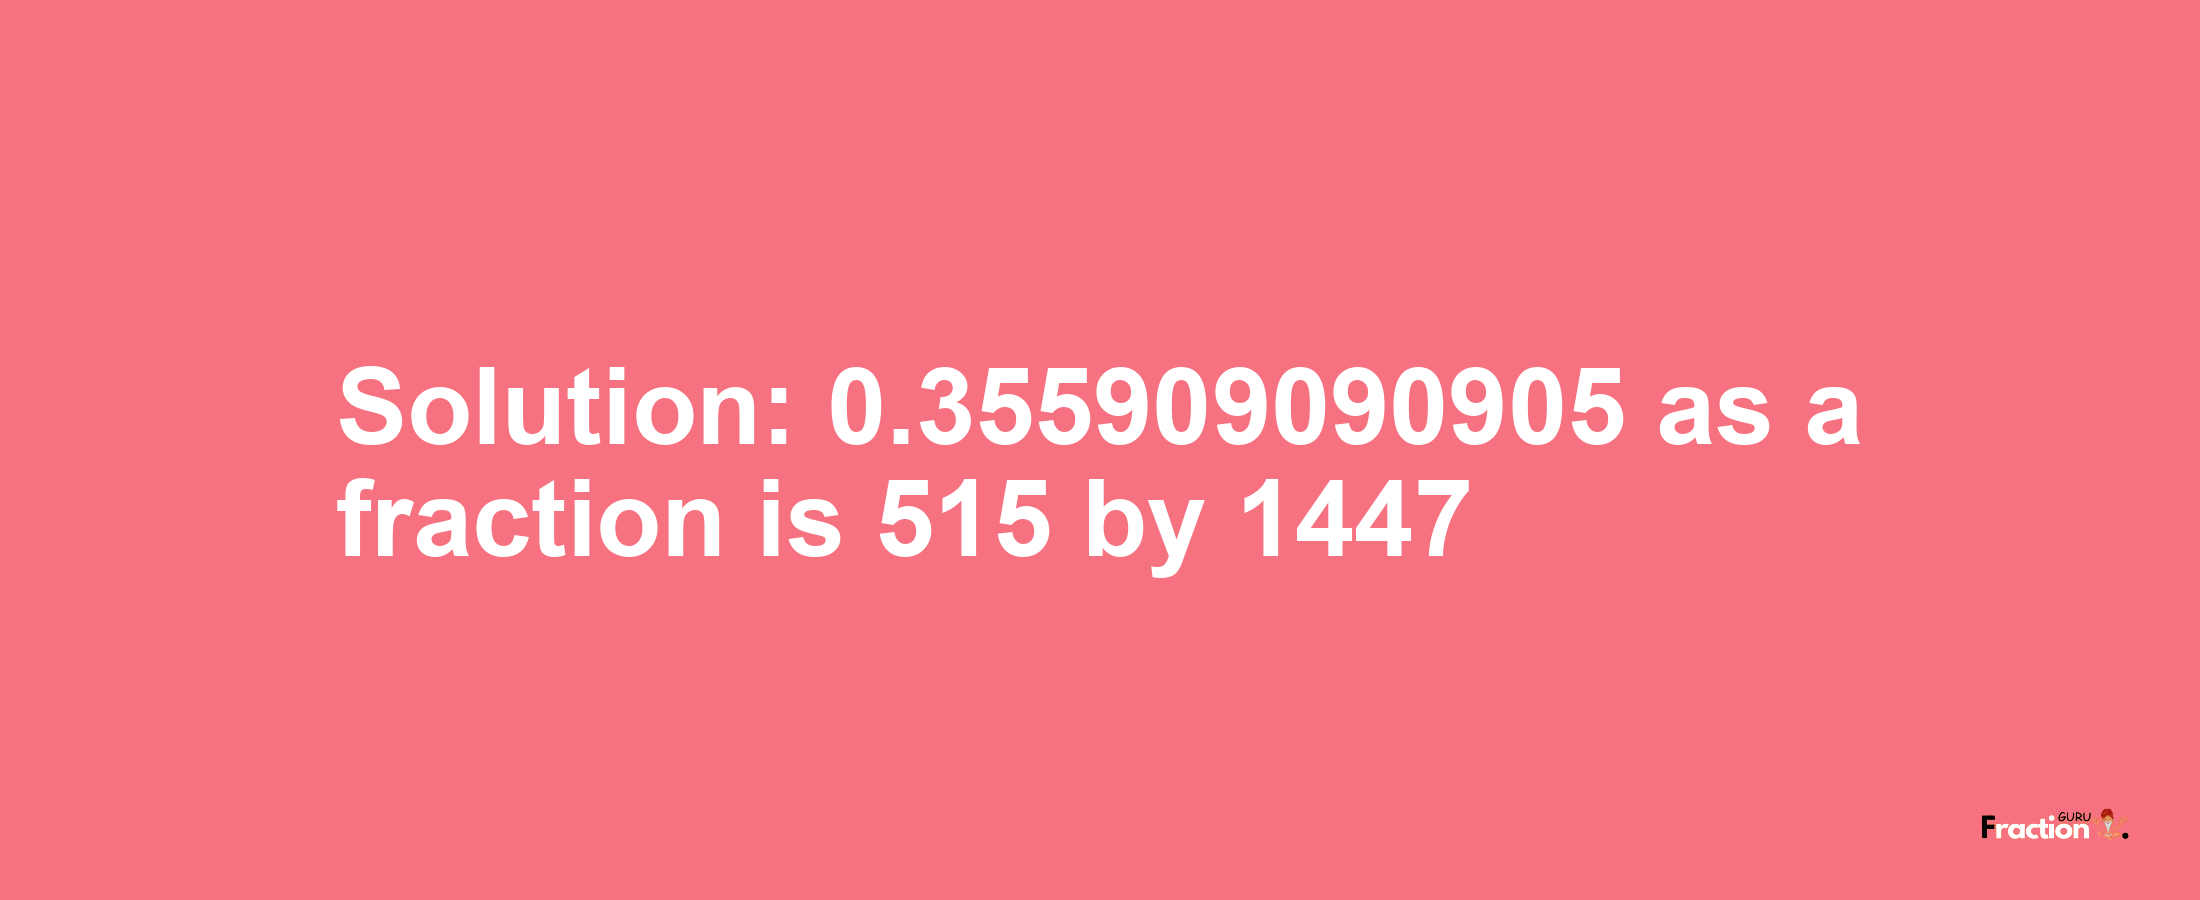 Solution:0.355909090905 as a fraction is 515/1447